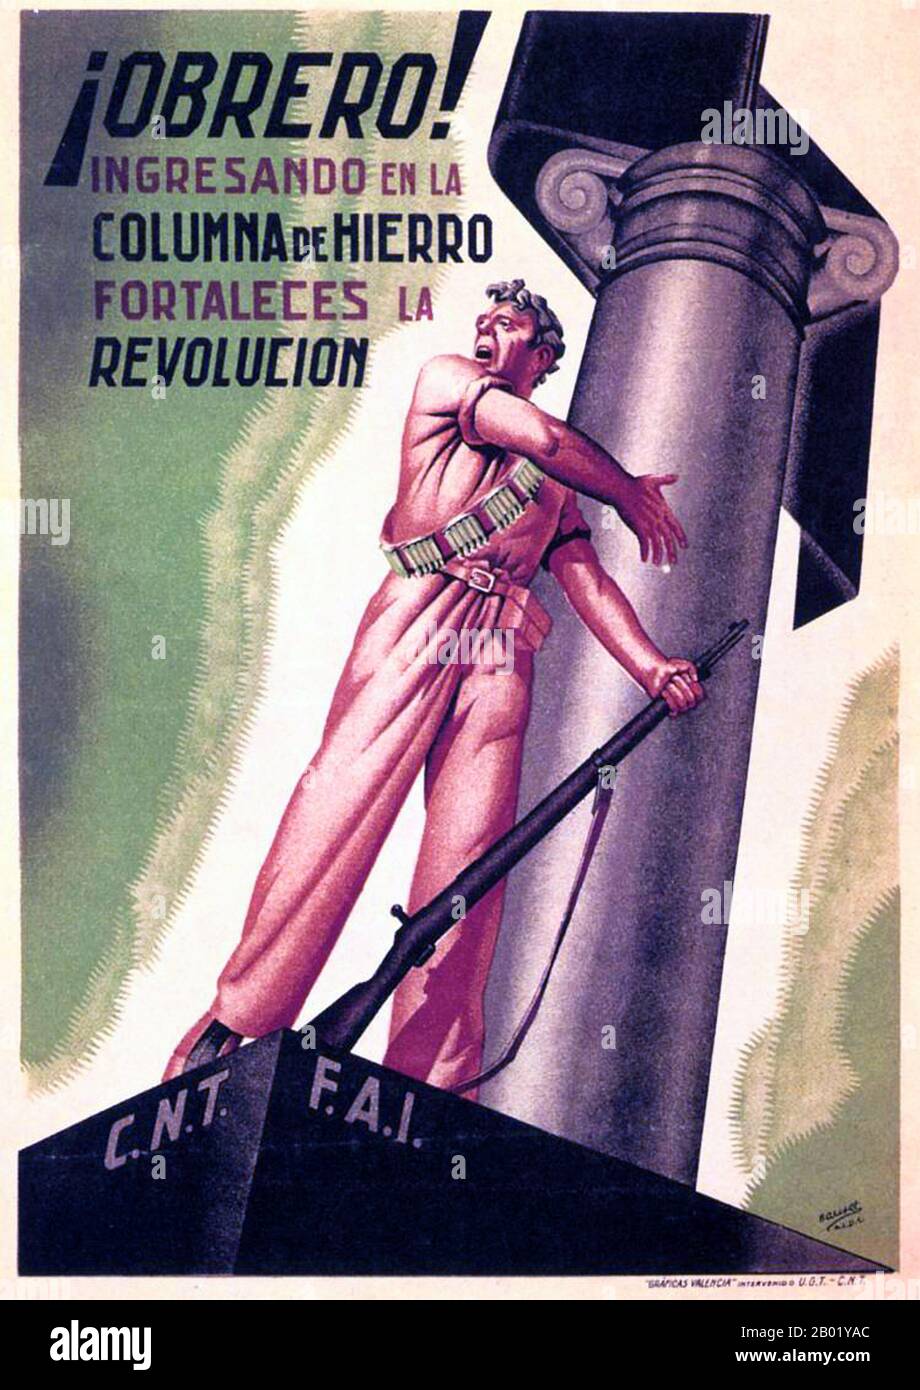 The Confederación Nacional del Trabajo (CNT; 'National Confederation of Labour') is a Spanish confederation of anarcho-syndicalist labor unions affiliated with the International Workers Association (IWA; Spanish: AIT – Asociación Internacional de los Trabajadores).  When working with the latter group it is also known as CNT-AIT. Historically, the CNT has also been affiliated with the Federación Anarquista Ibérica (Iberian Anarchist Federation – FAI). In this capacity it was referred to as the CNT-FAI. Throughout its history, it has played a major role in the Spanish labor movement. Stock Photo